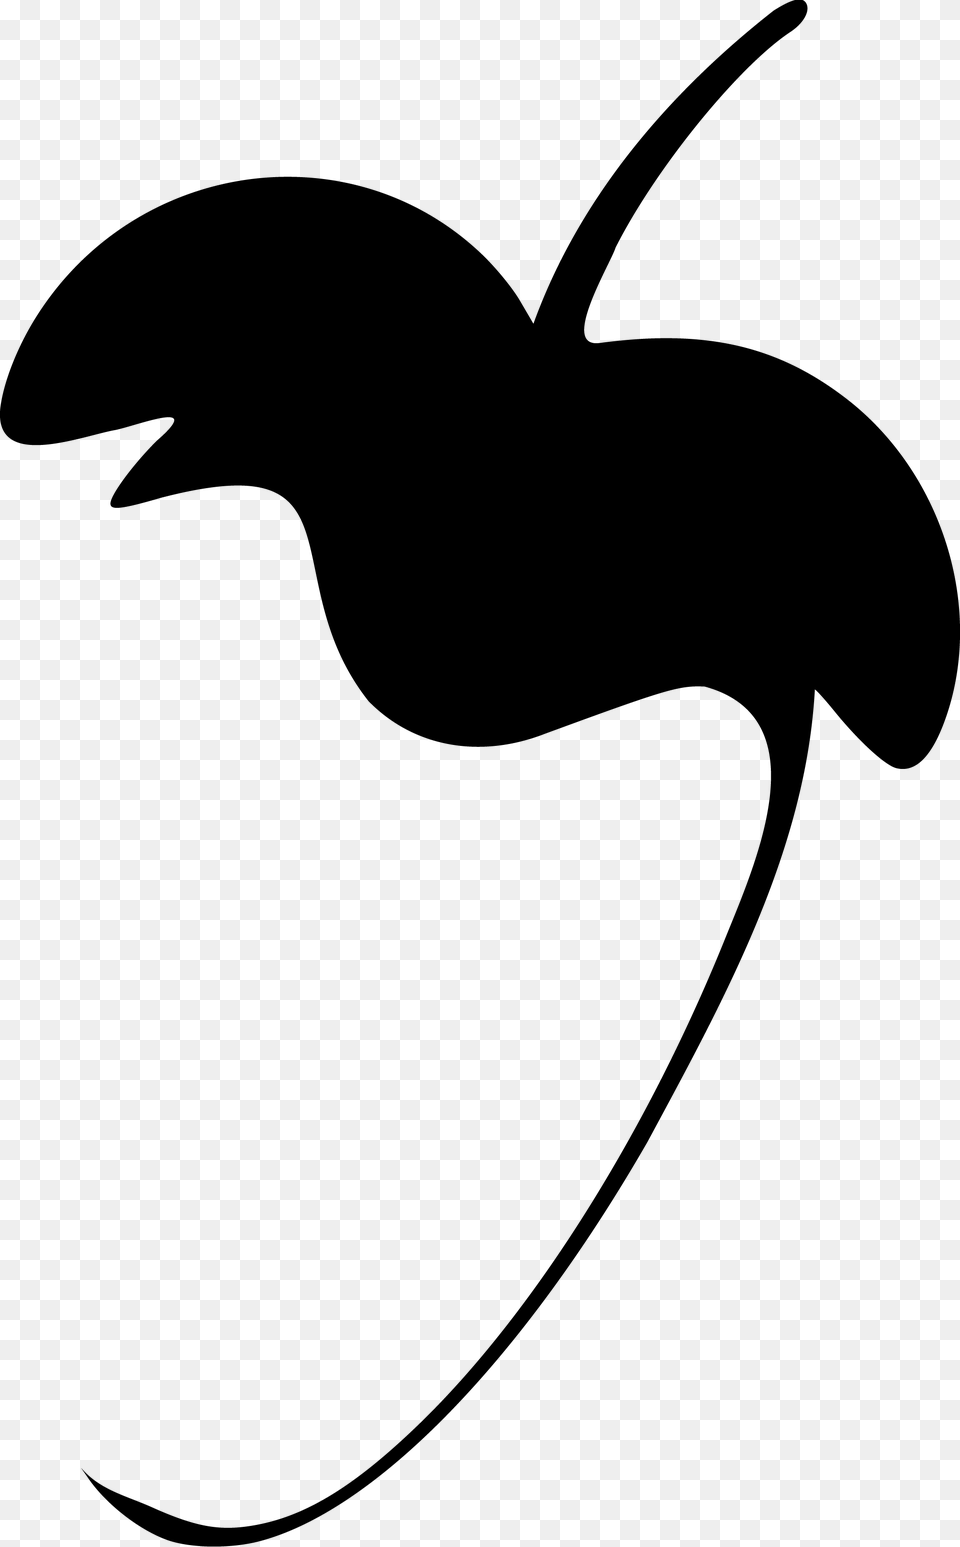 Whats The Name Of The Fl Studio Fruit, Stencil, Silhouette, Bow, Weapon Free Png Download